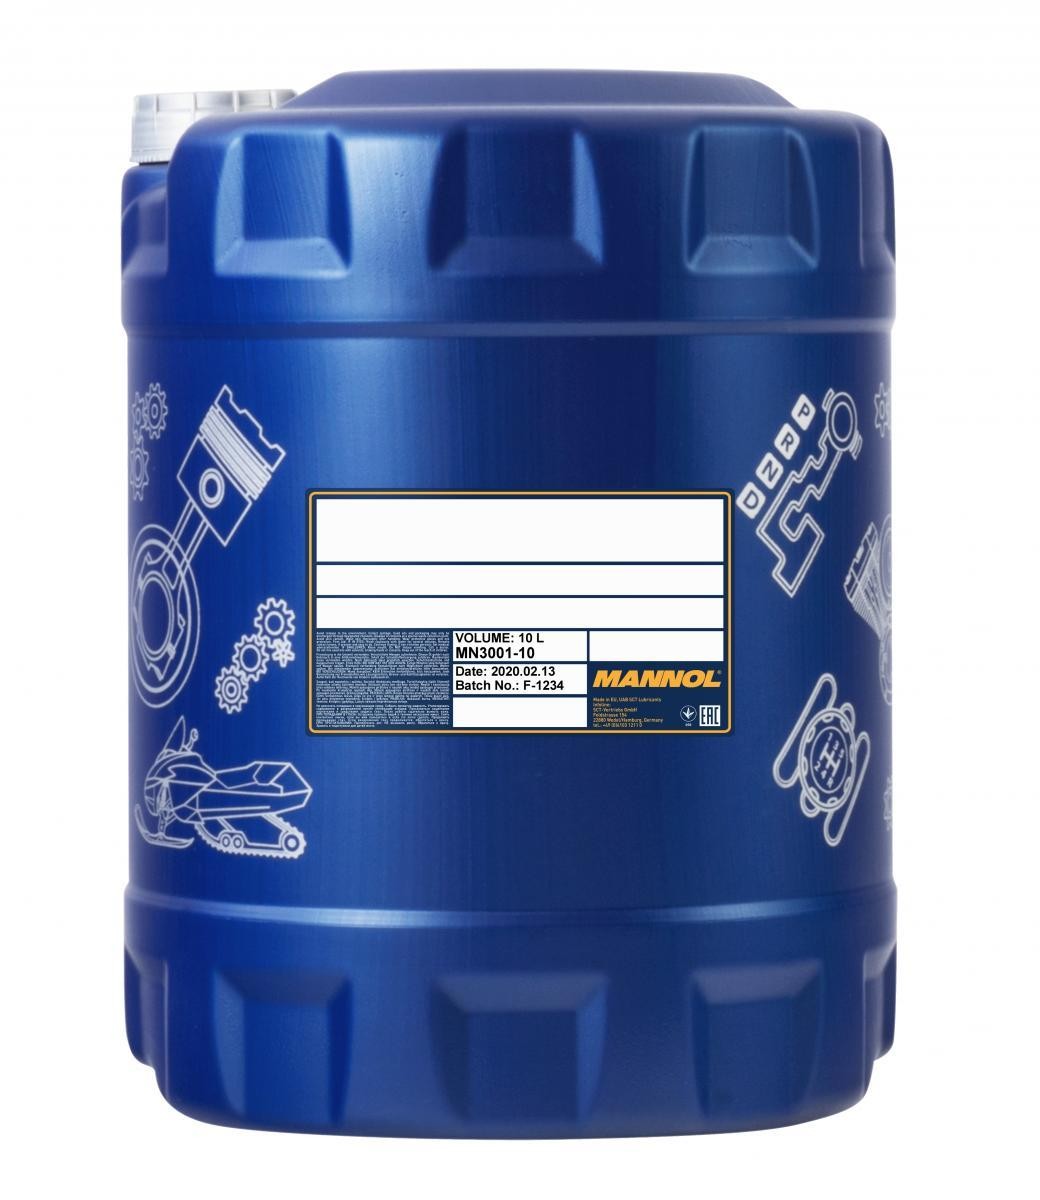 Diesel exhaust fluids / adblue for your car ▷ at low prices